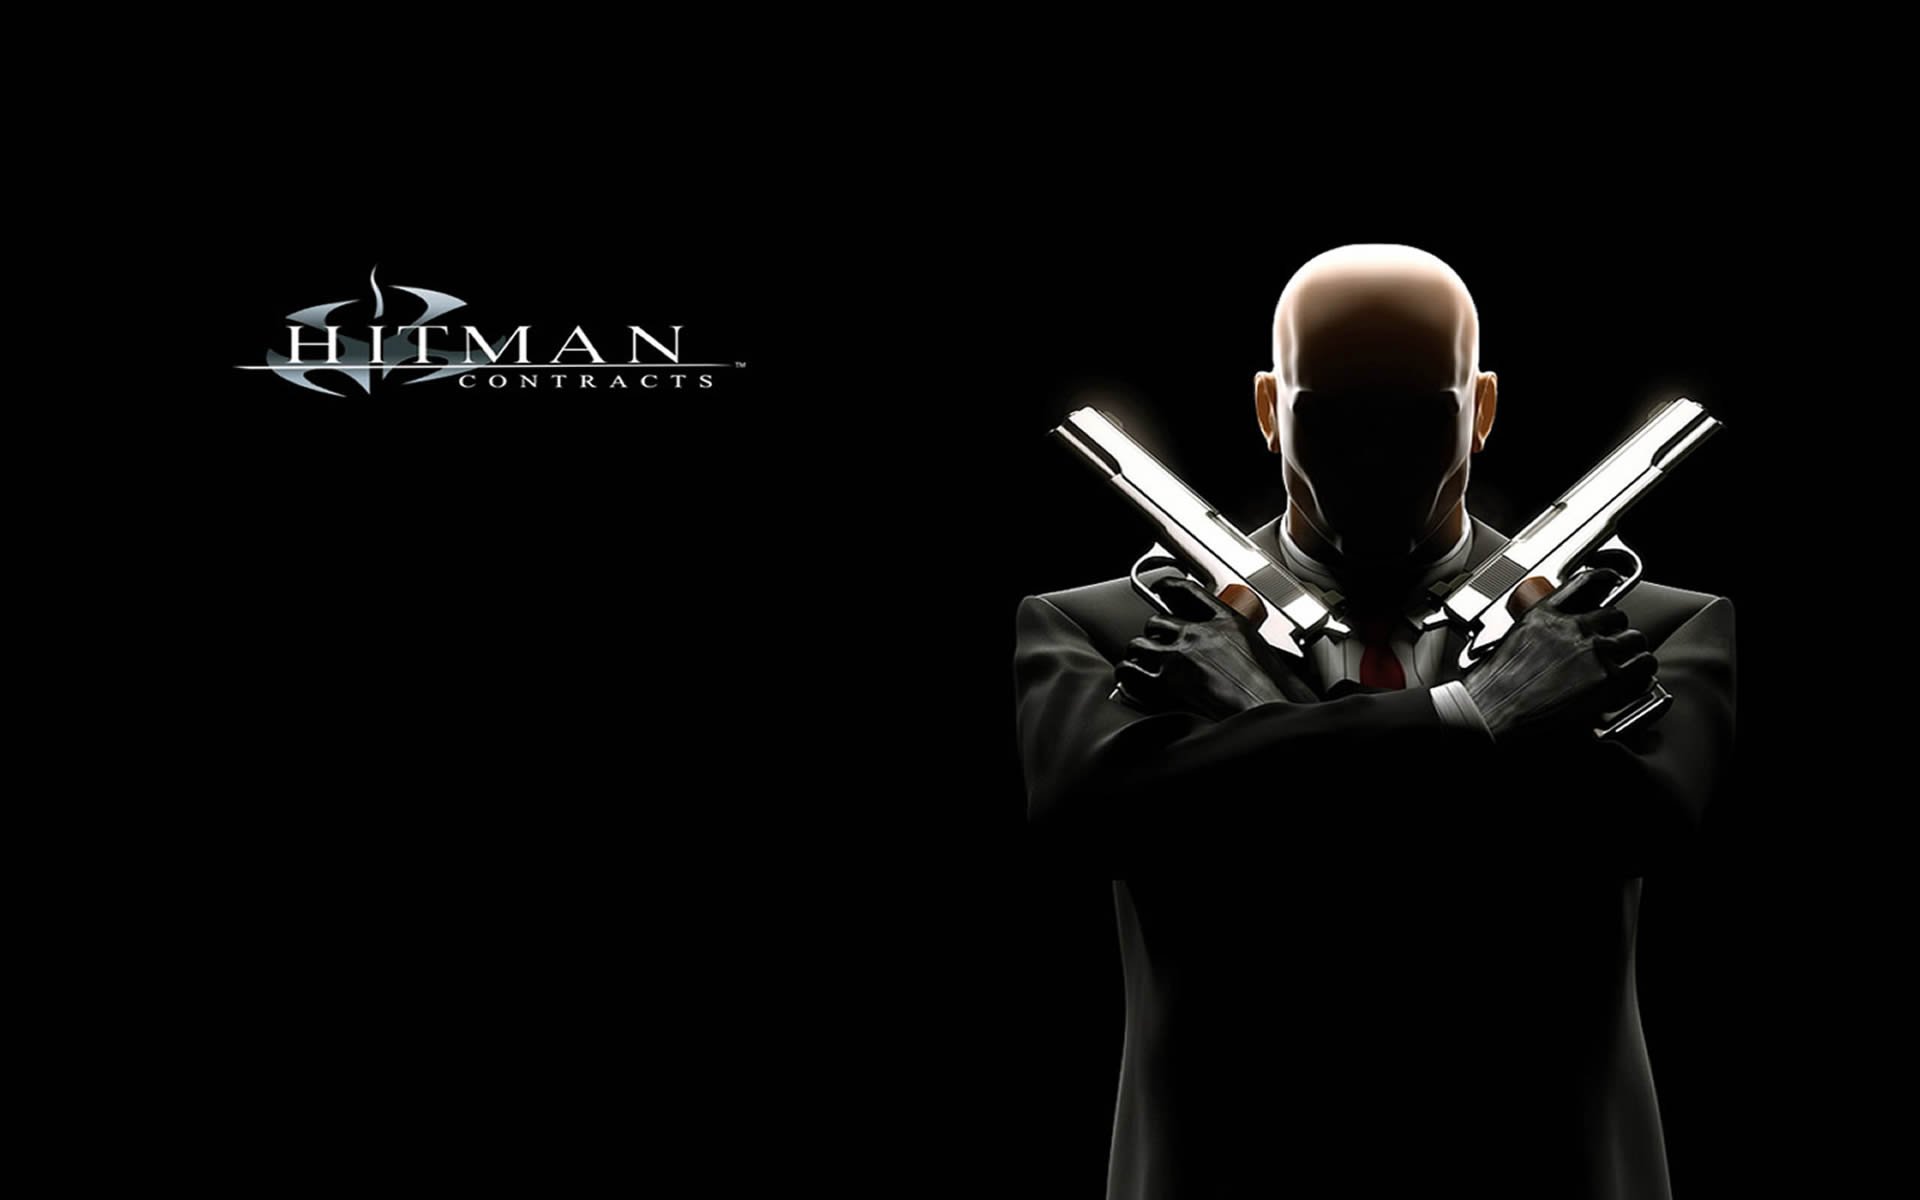 Logo Shadow   Action Games Wallpaper Image featuring Hitman Contracts